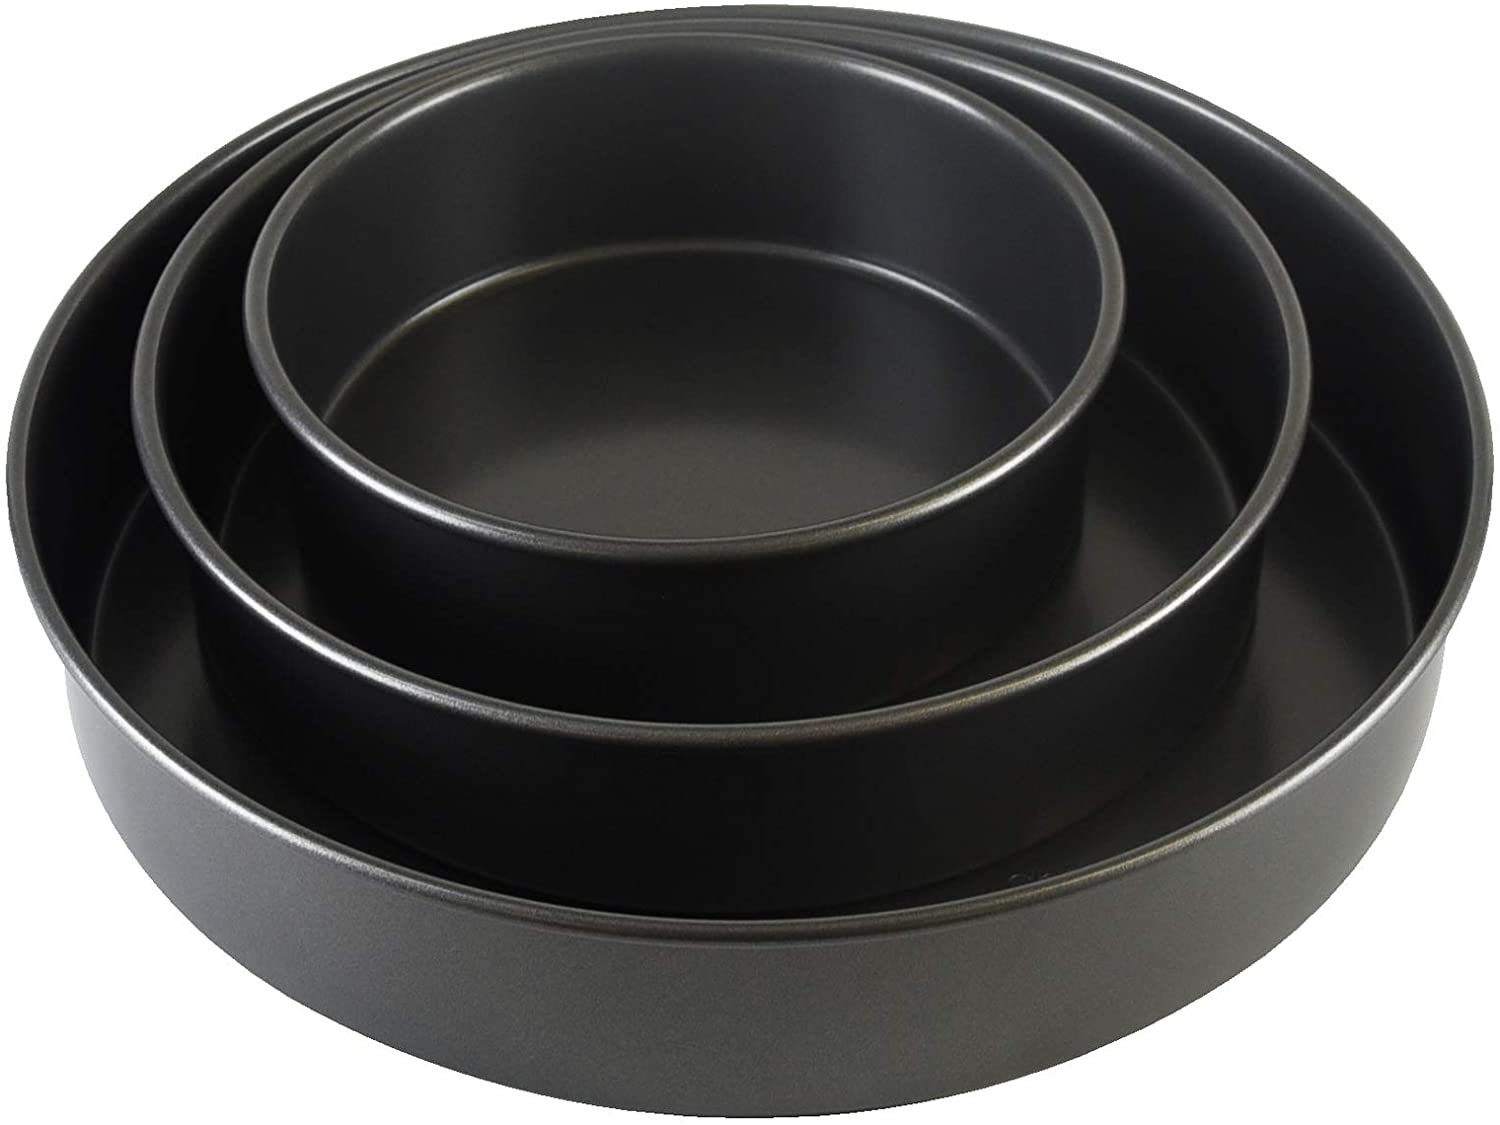 Buy the Right Cake Pan for Your Kitchen